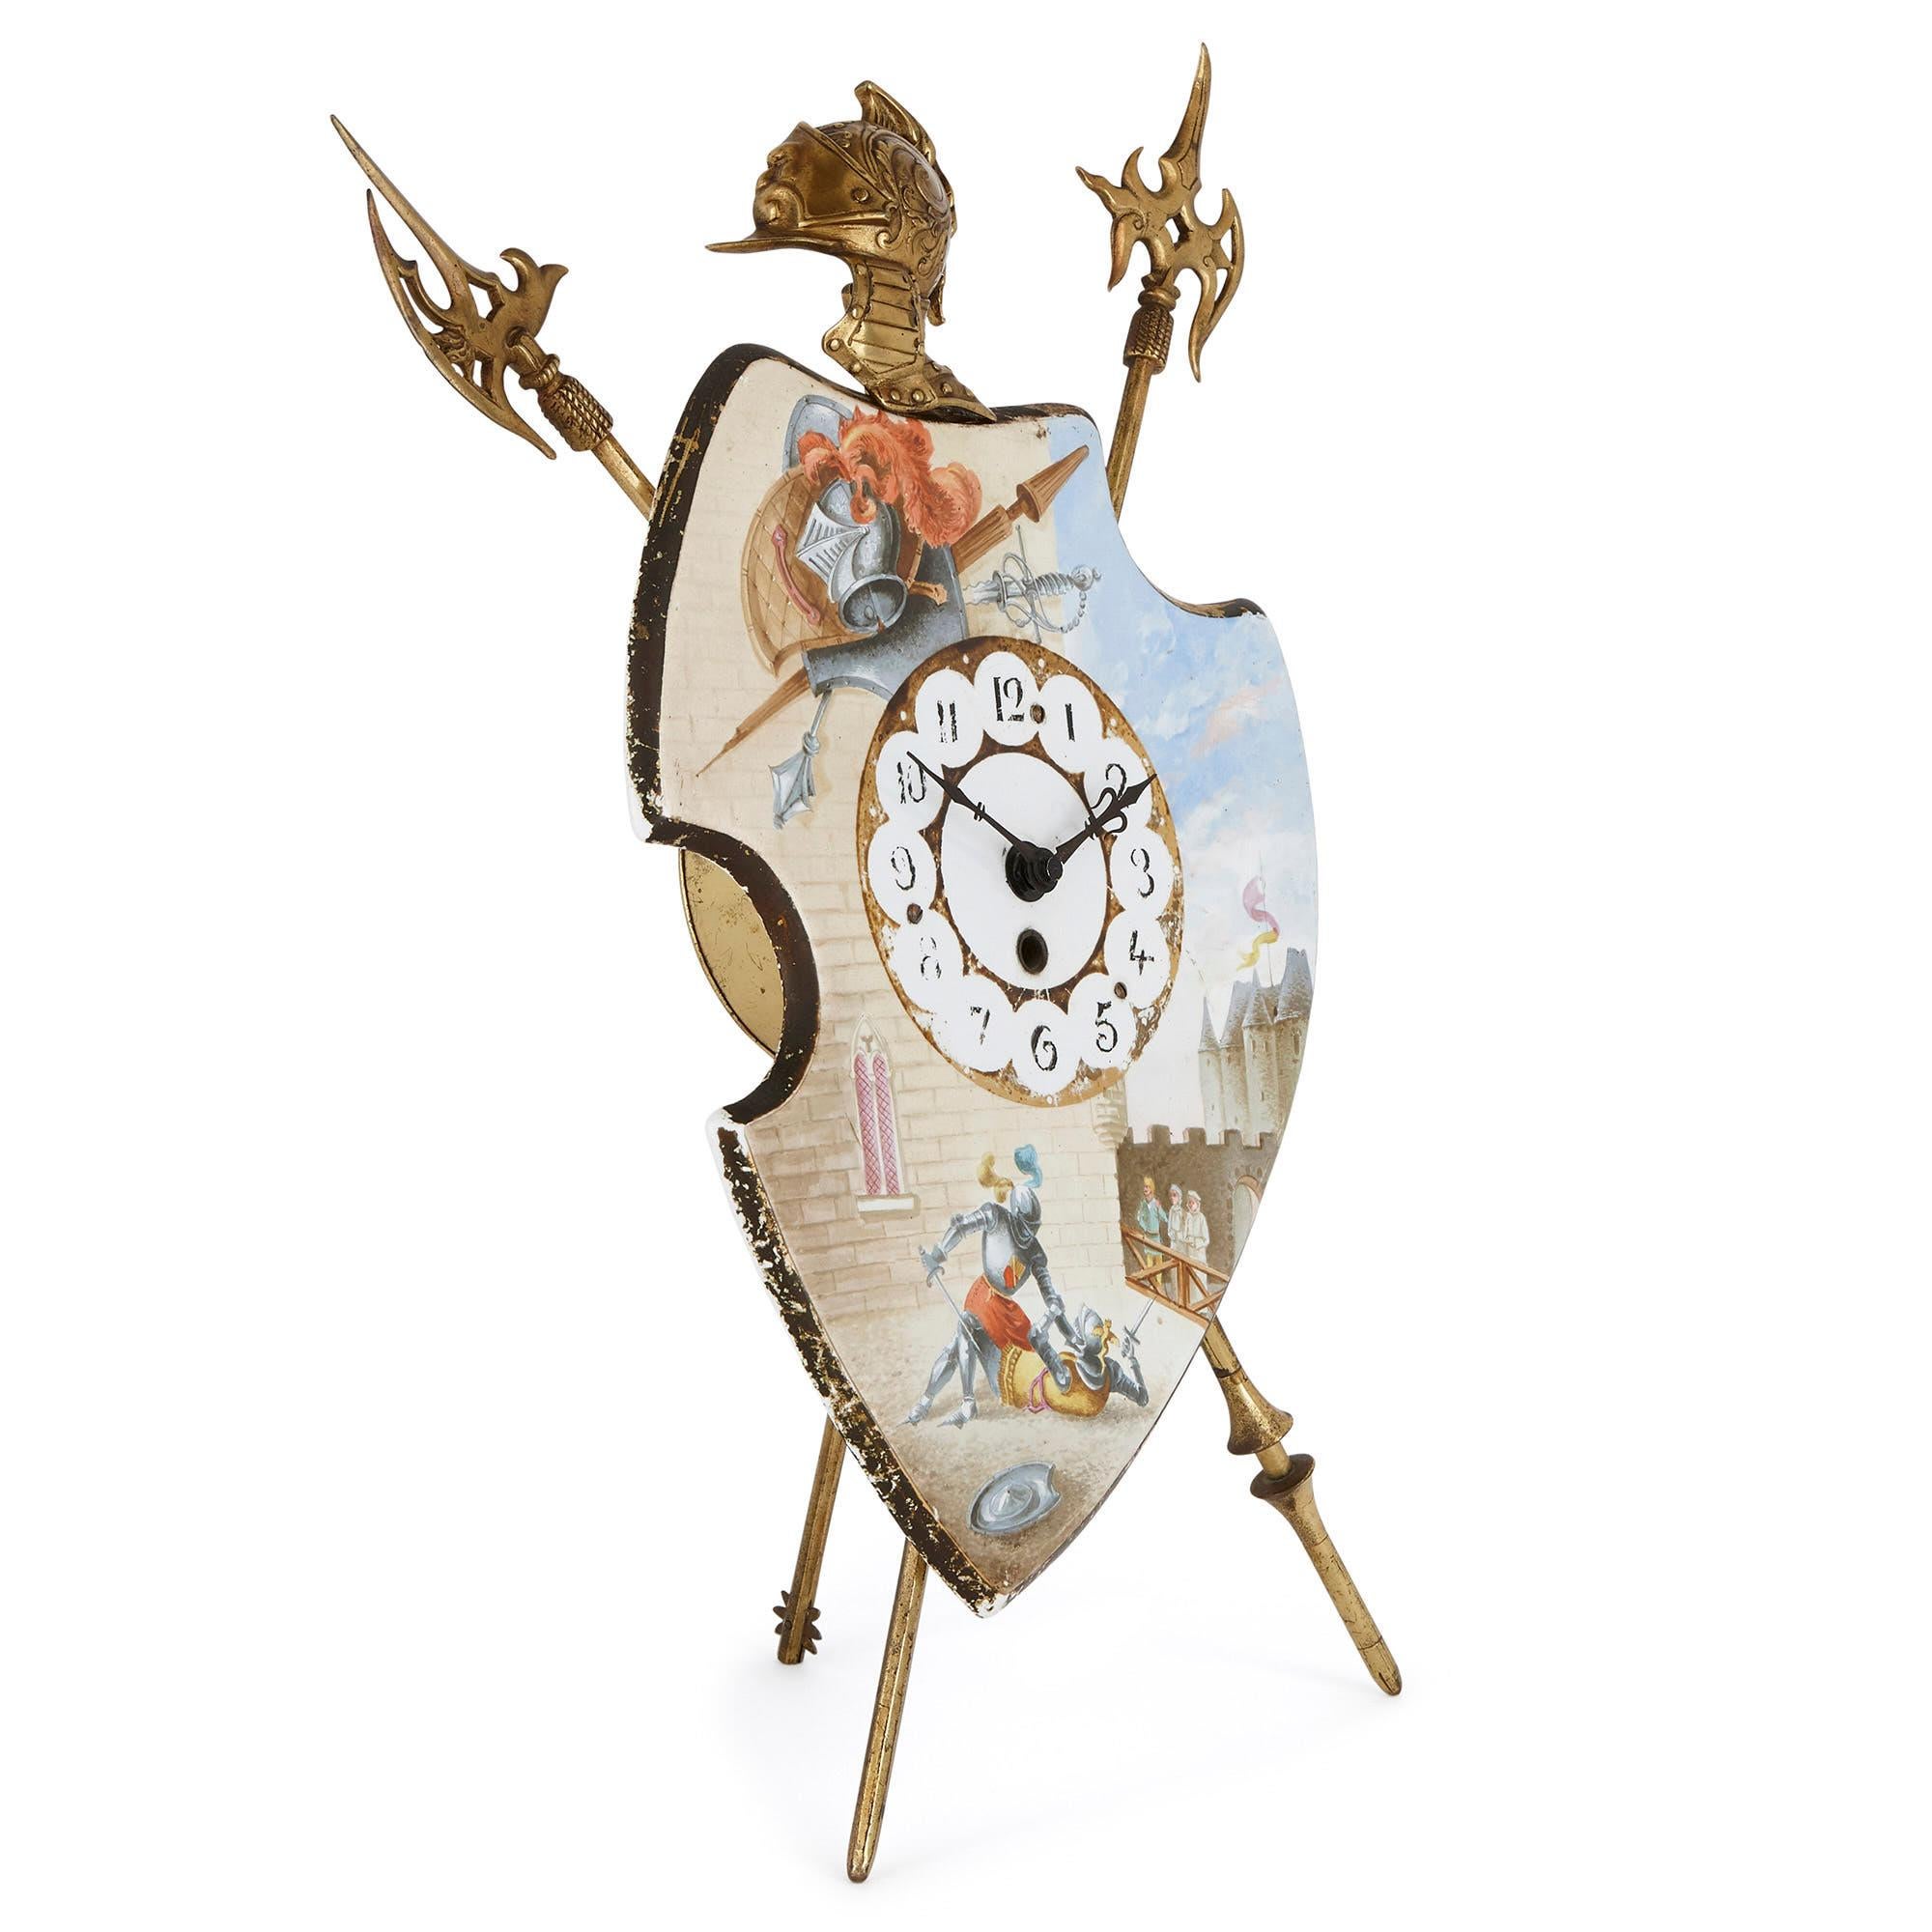 This beautiful porcelain mantel clock is designed in the shape of a shield which is propped up on a gilt bronze (ormolu) easel support, composed of two shields and a staff topped by a helmet. The porcelain shield is painted, in the upper left